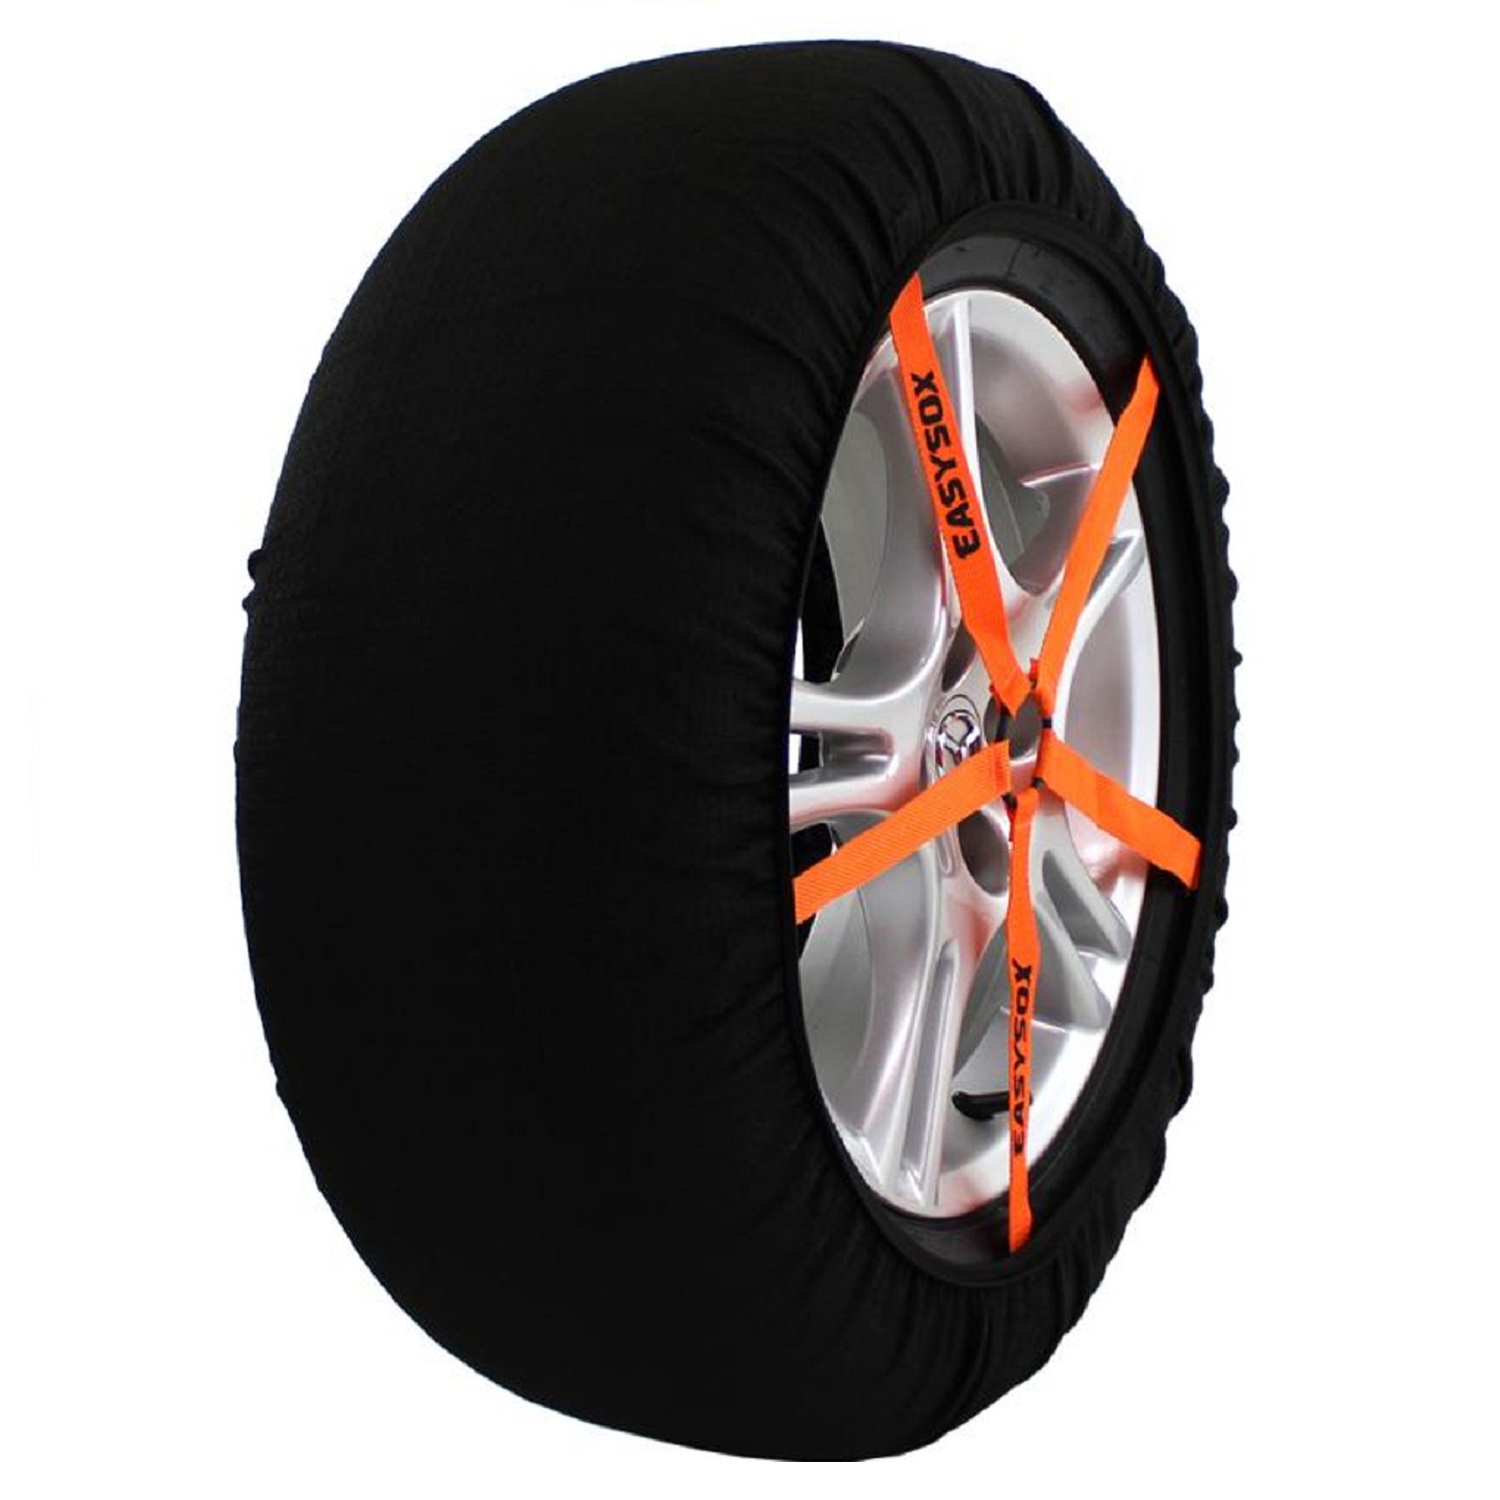 AutoSock AS600 Traction Wheel and Tire Cover for Ice & Snow Easy Install  Tire Chain Alternative